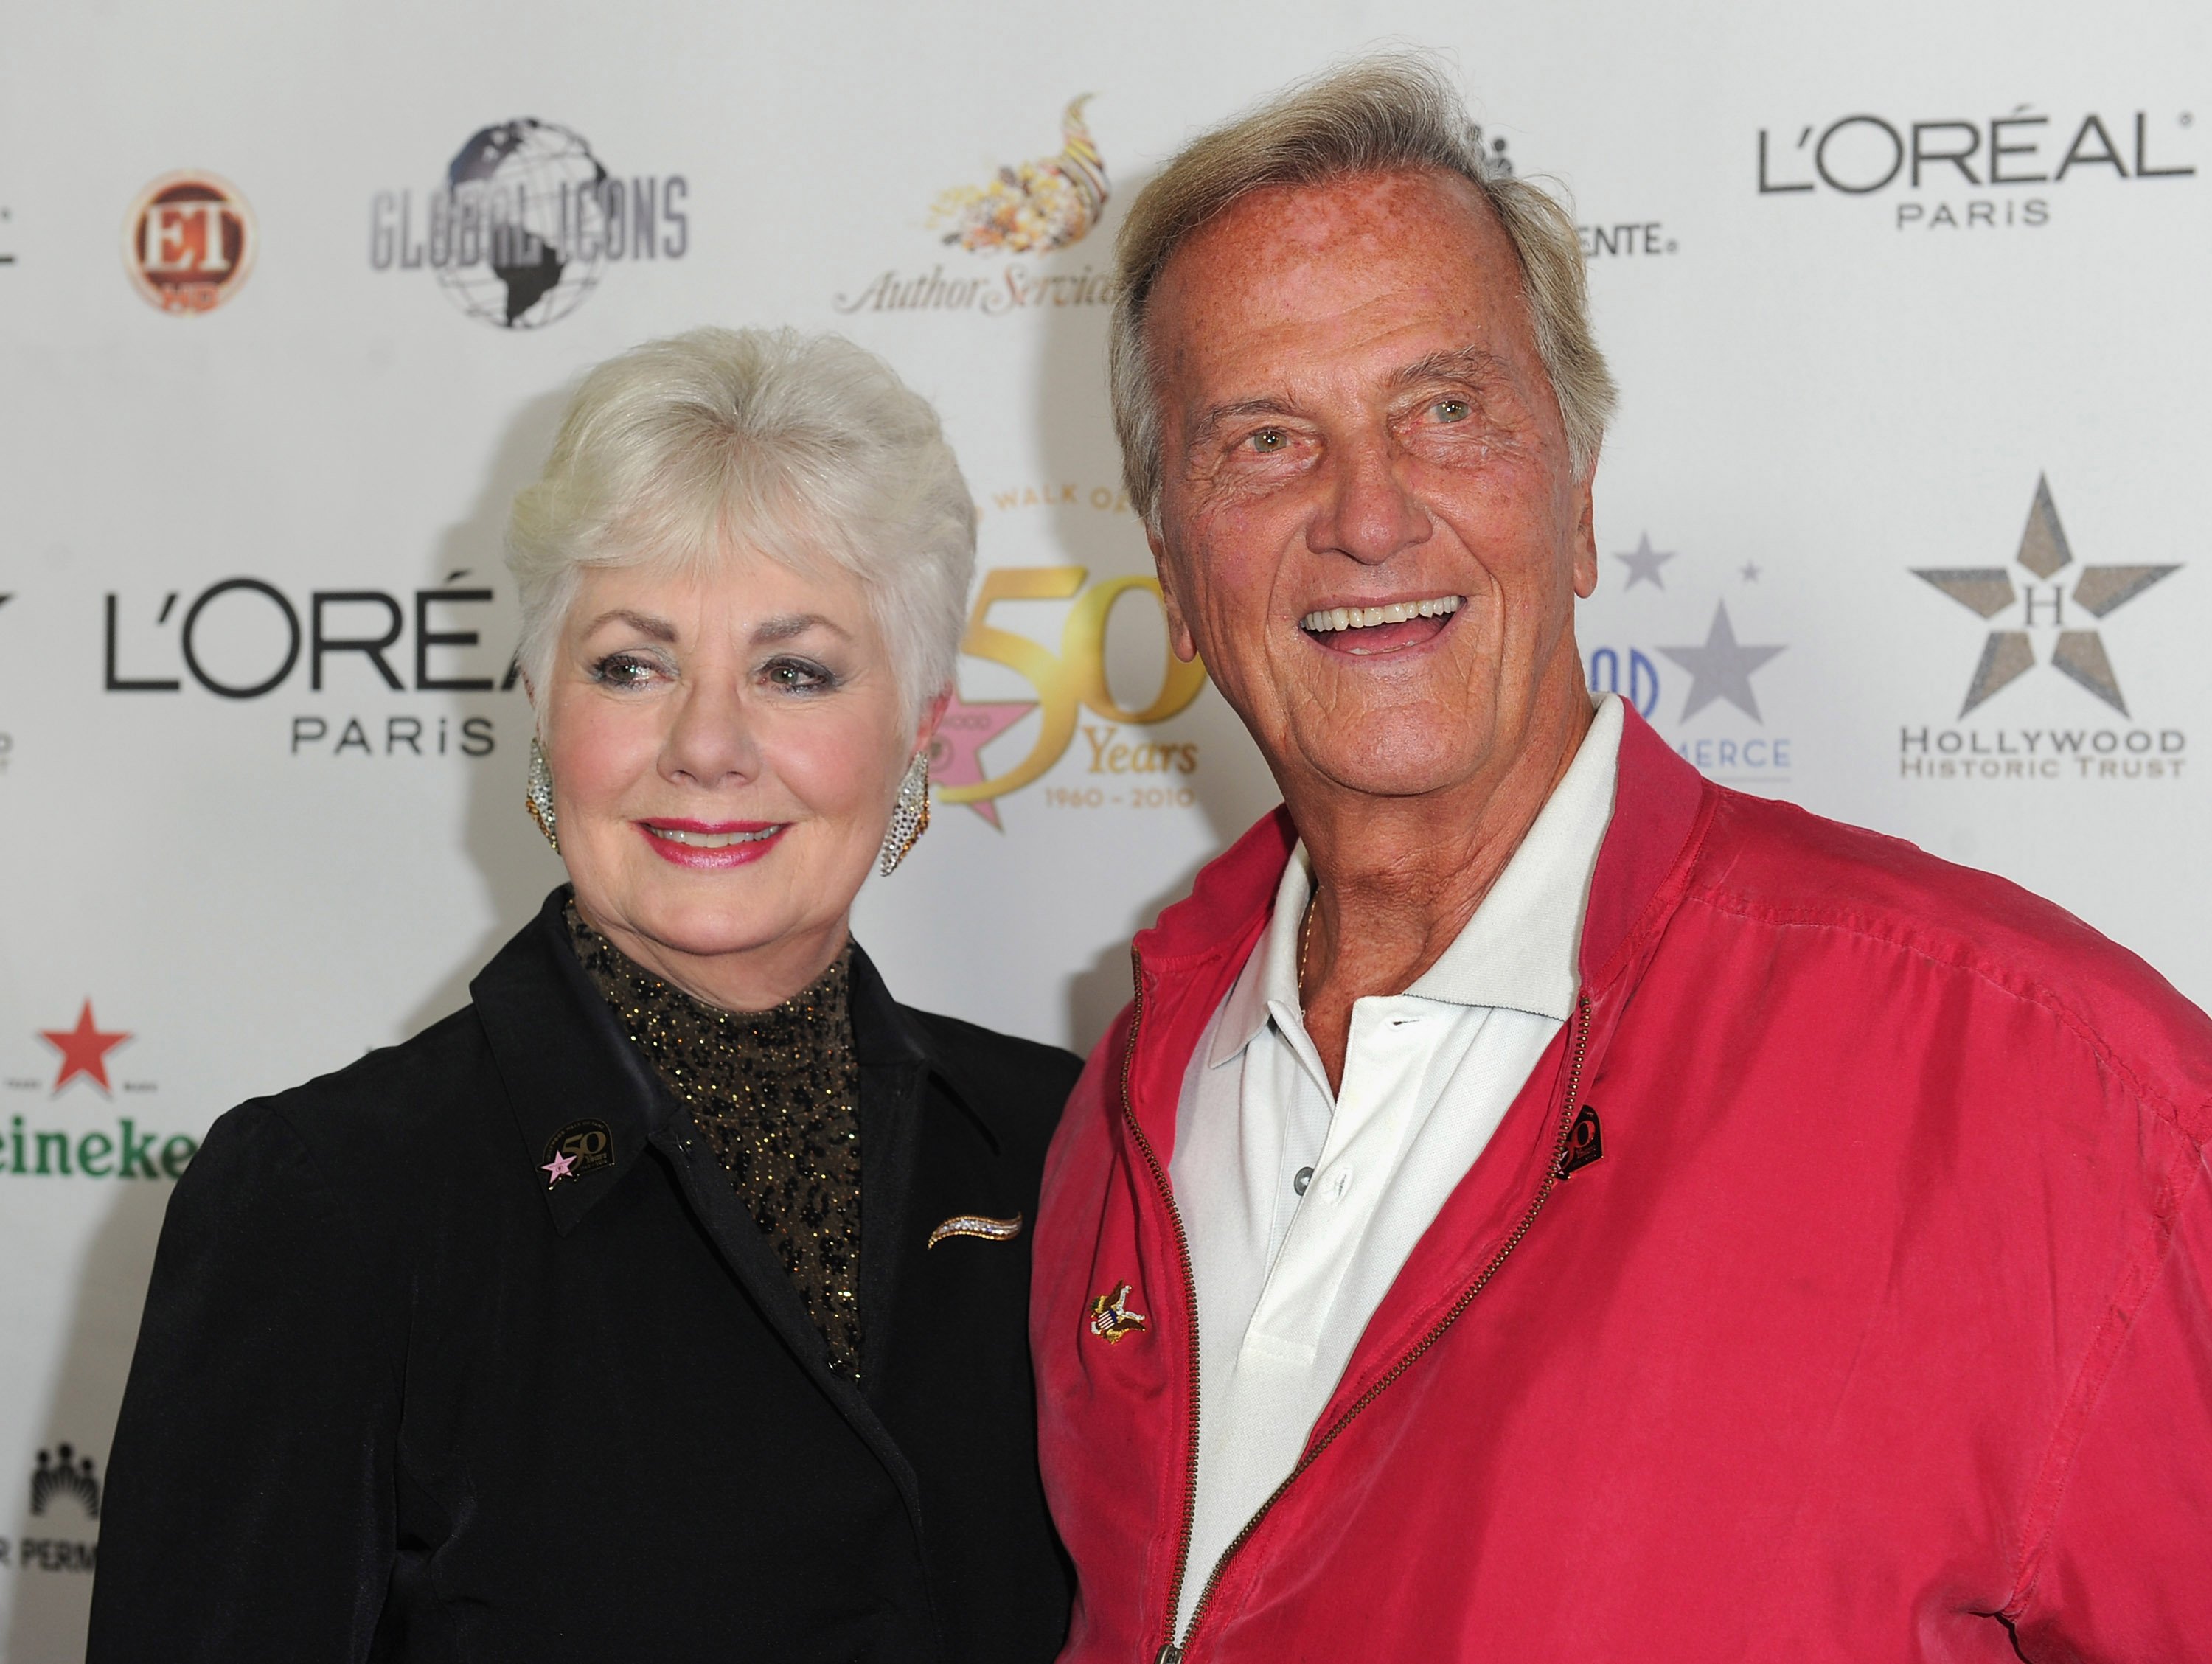 Actress Shirley Jones and singer Pat Boone arrive to the Hollywood Walk of Fame's 50th Anniversary Celebration on November 3, 2010 in Hollywood, California. | Source: Getty Images